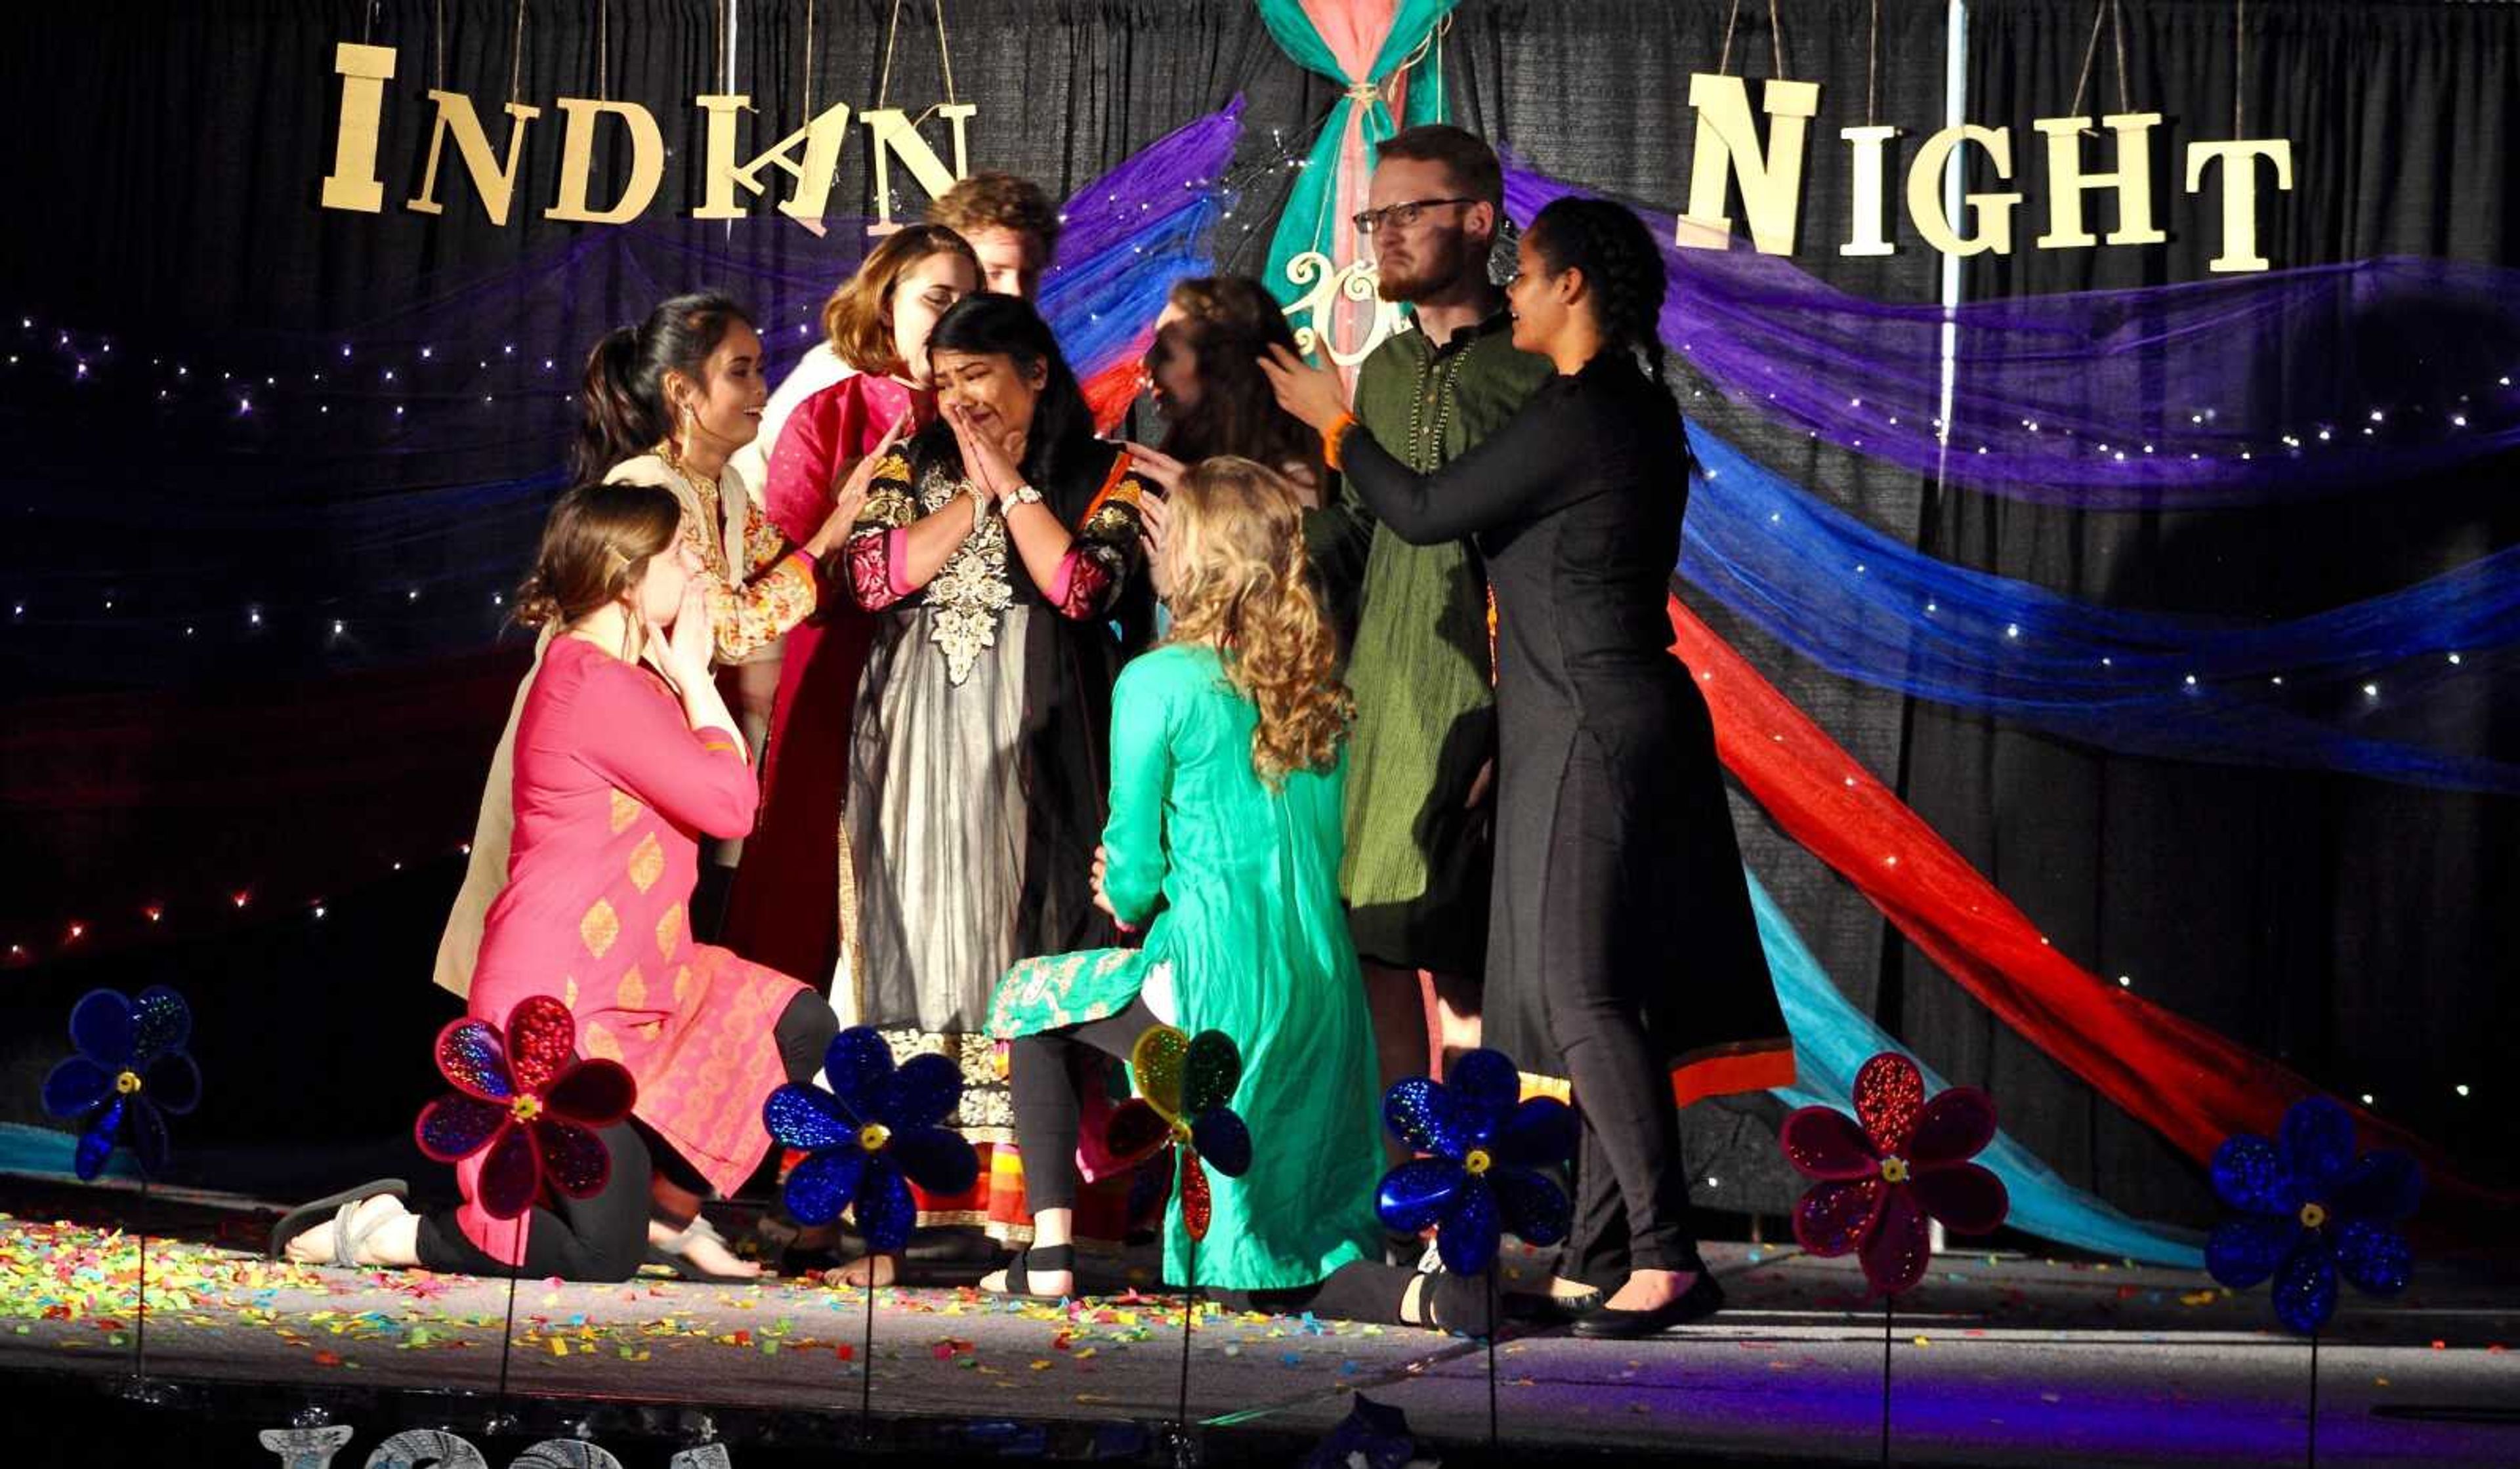 ISSA Vice President Priyanka Kashyap and other members of Ignite perform in authentic Indian dress at Indian Night March 23.